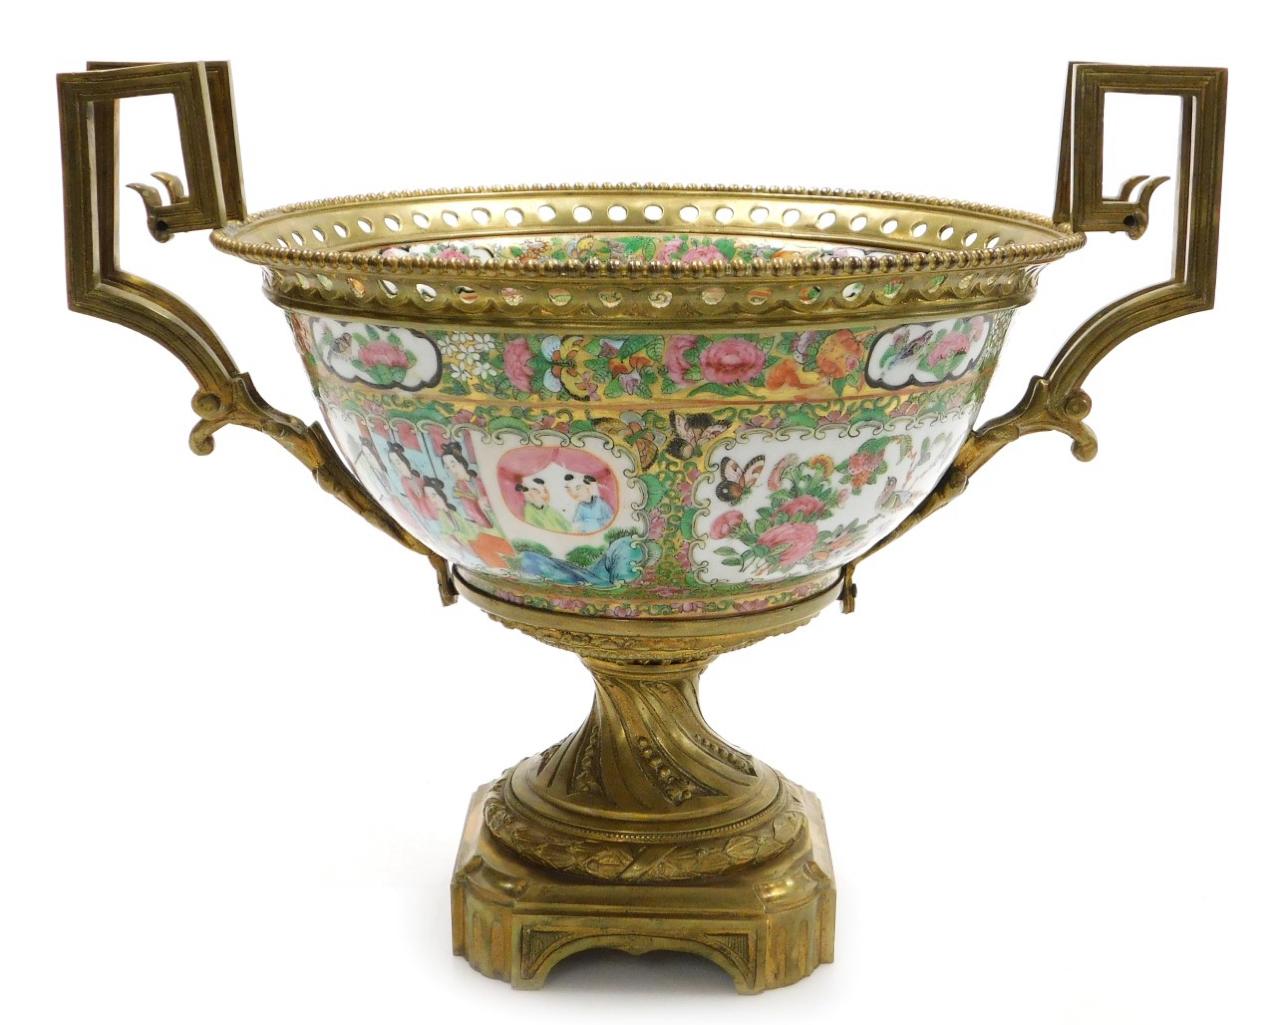 A Large 19th Century Cantonese famille rose porcelain and ormolu mounted bowl, with a beaded and pierced mount and angular scroll handles, the bowl decorated with reserves of figures, and birds, butterflies and flowers, within a gilt ground